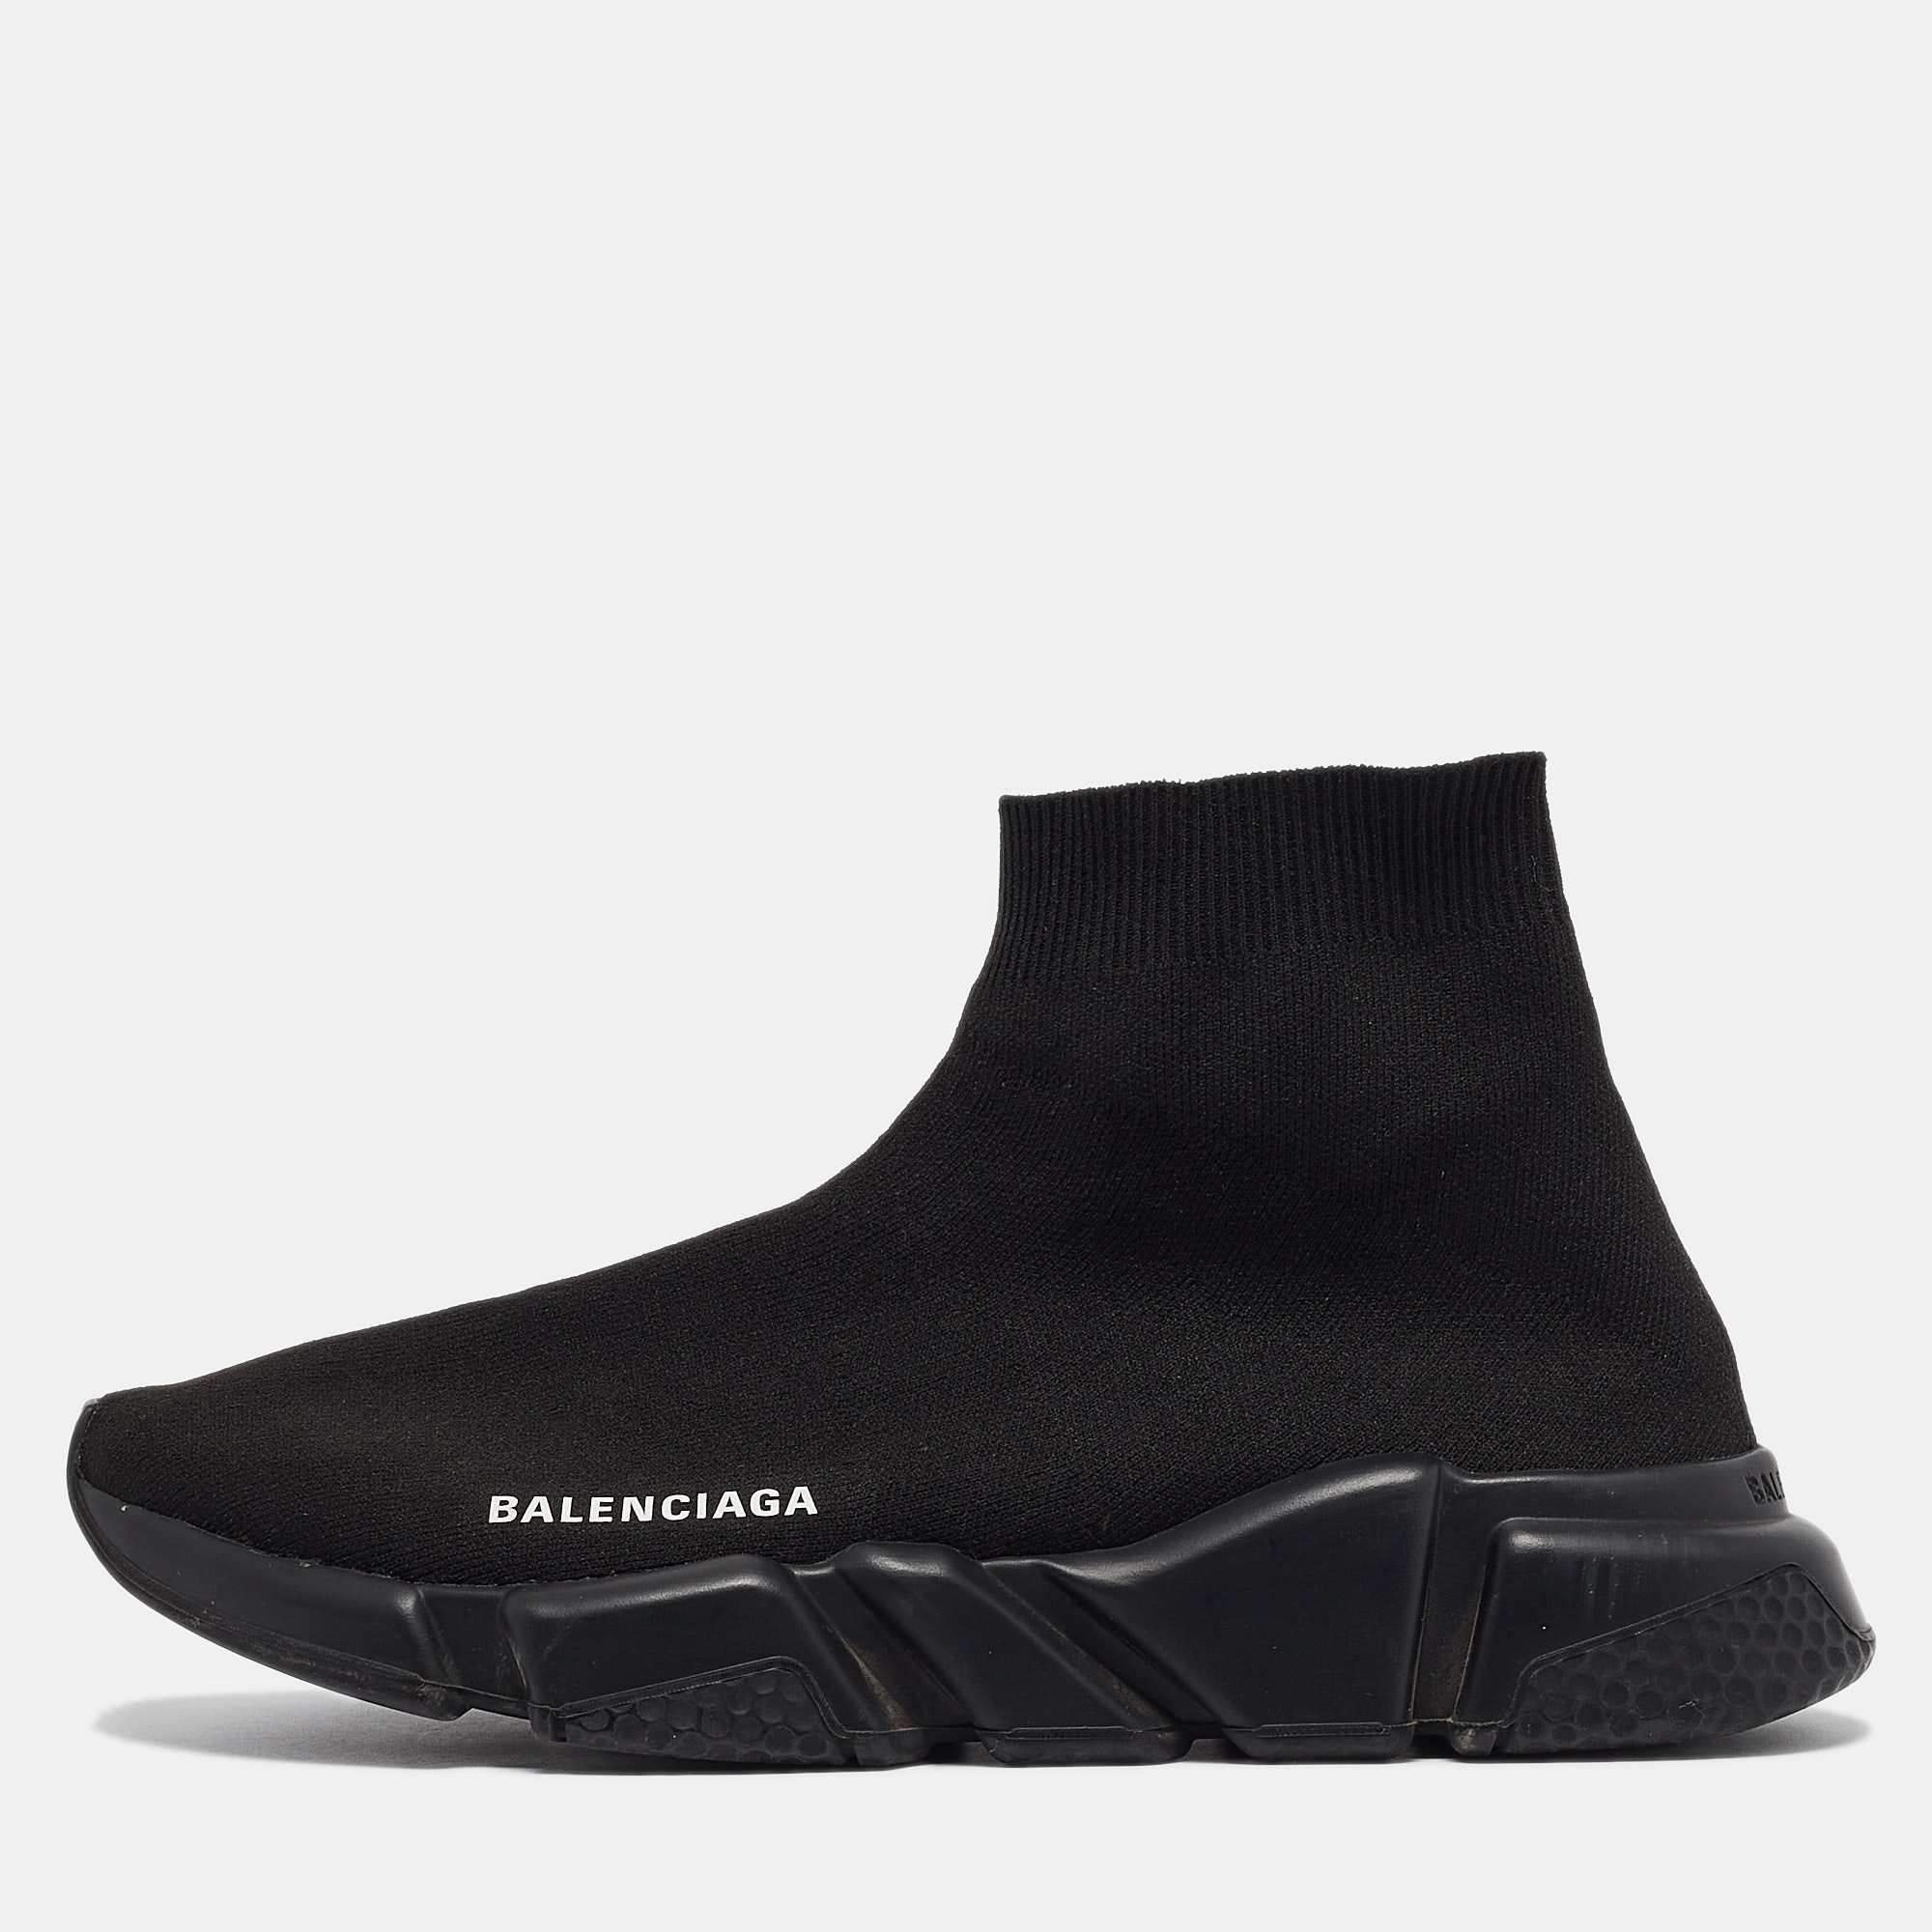 Celebrating the fusion of sports and luxury fashion these Balenciaga Speed Trainer sneakers are absolutely worth the splurge. They are laceless and so well crafted with breathable knit fabric in a sock style. The sneakers are also designed with shock absorption and memory soles to assist you at every step. Fully equipped to give you the best experience this style filled pair deserves to be yours.